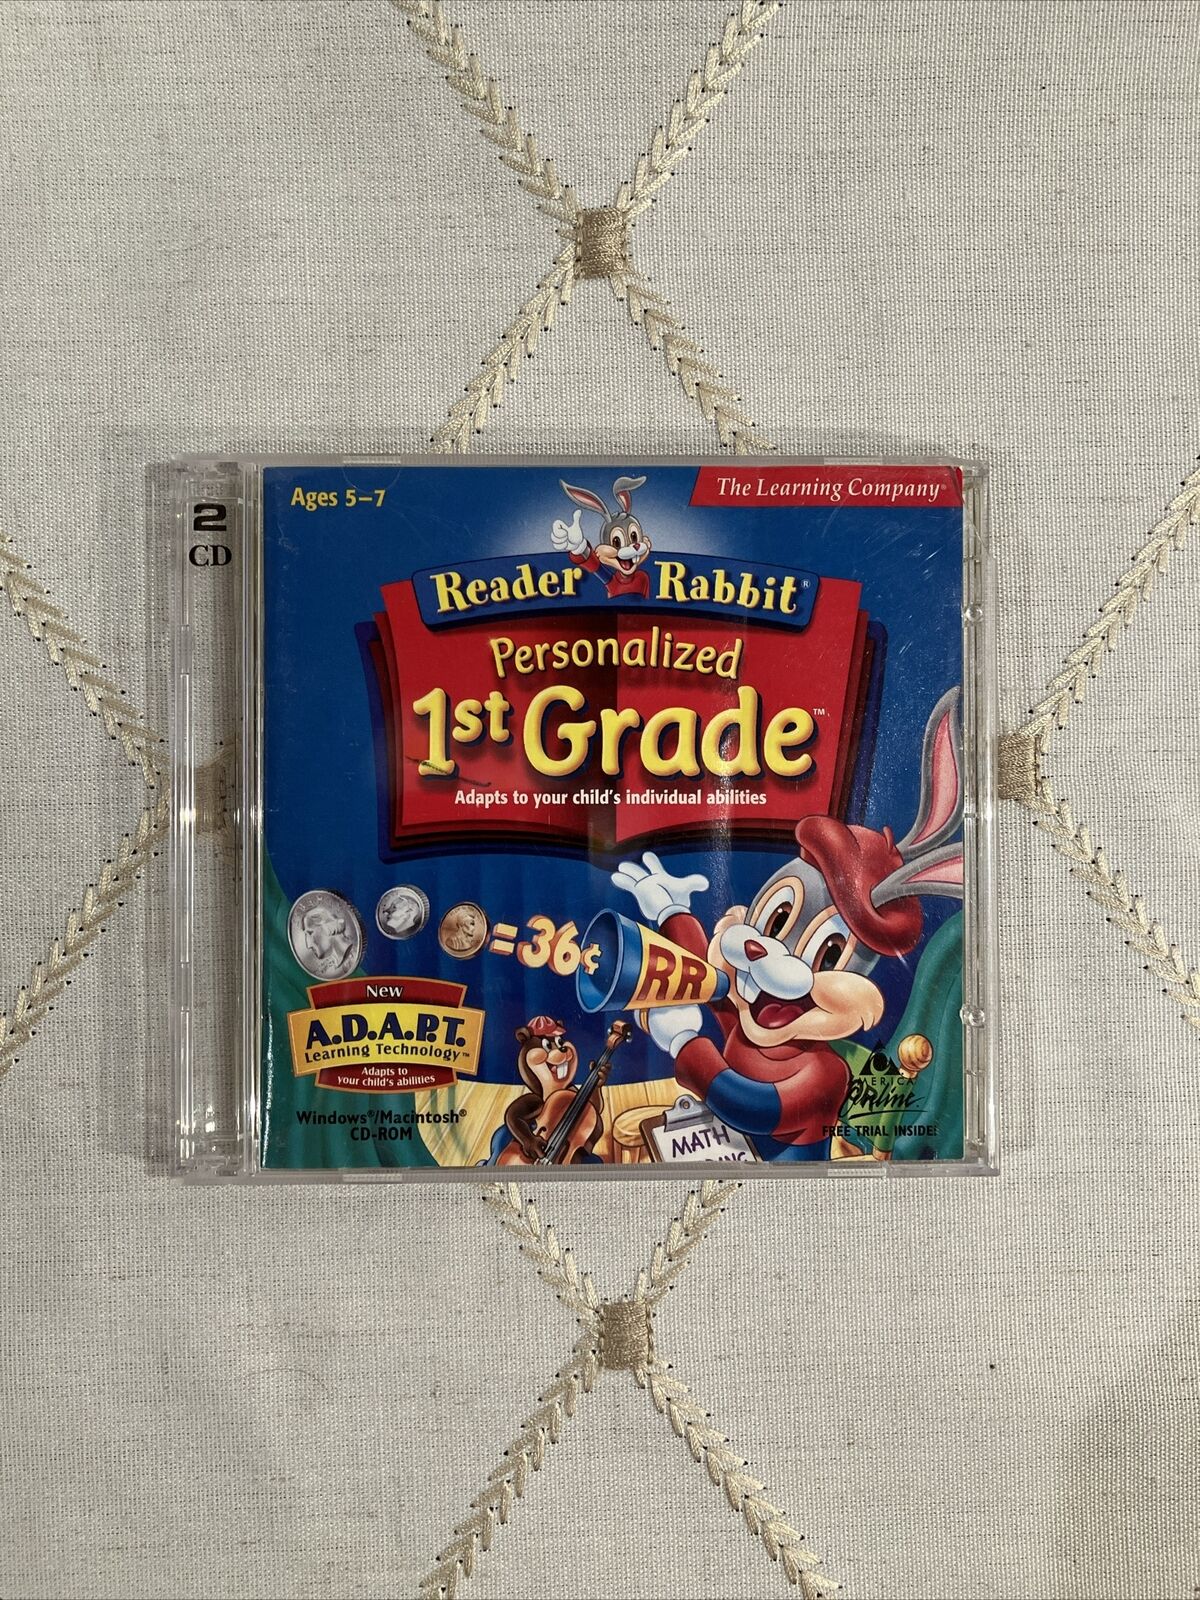 Reader Rabbit Personalized 1st Grade PC CD-ROM Windows/Mac The Learning Company